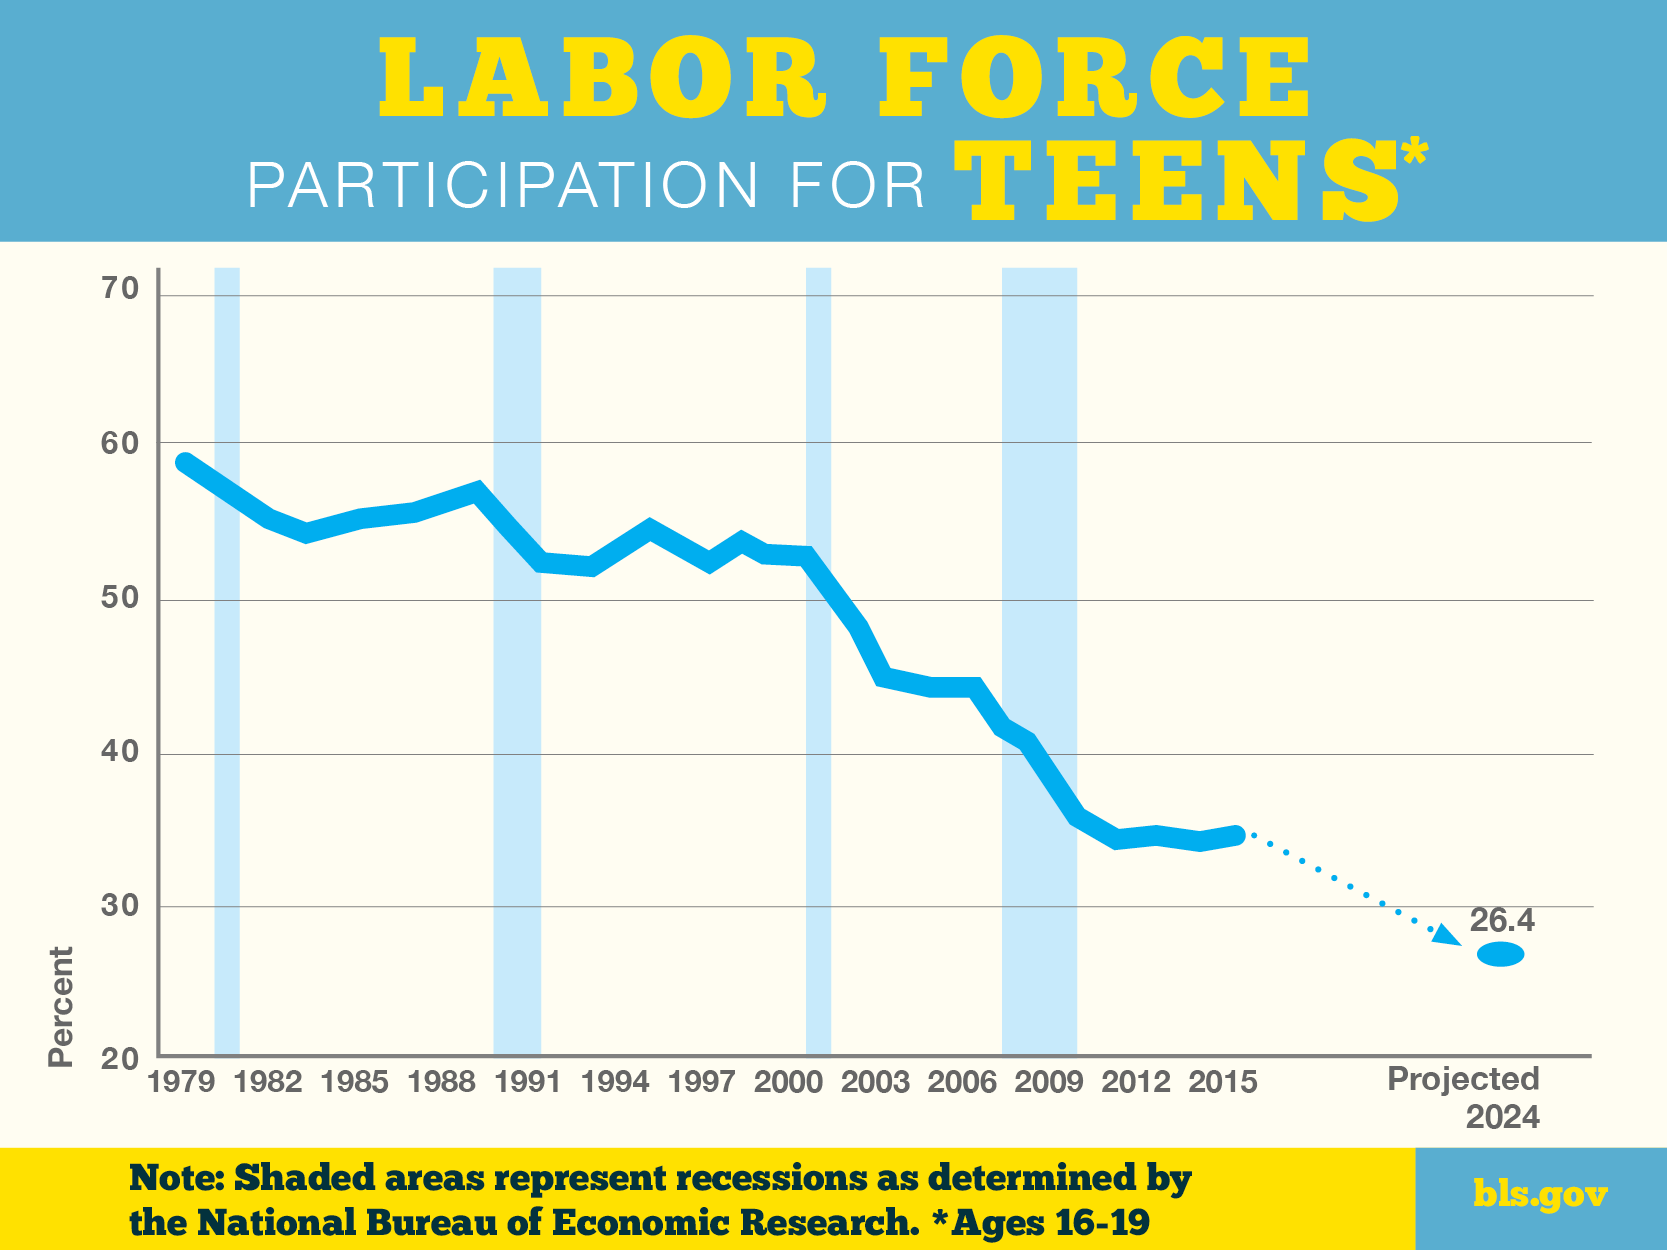 A chart showing trends in teen labor force participation rates from 1979 to 2015 and projected to 2024